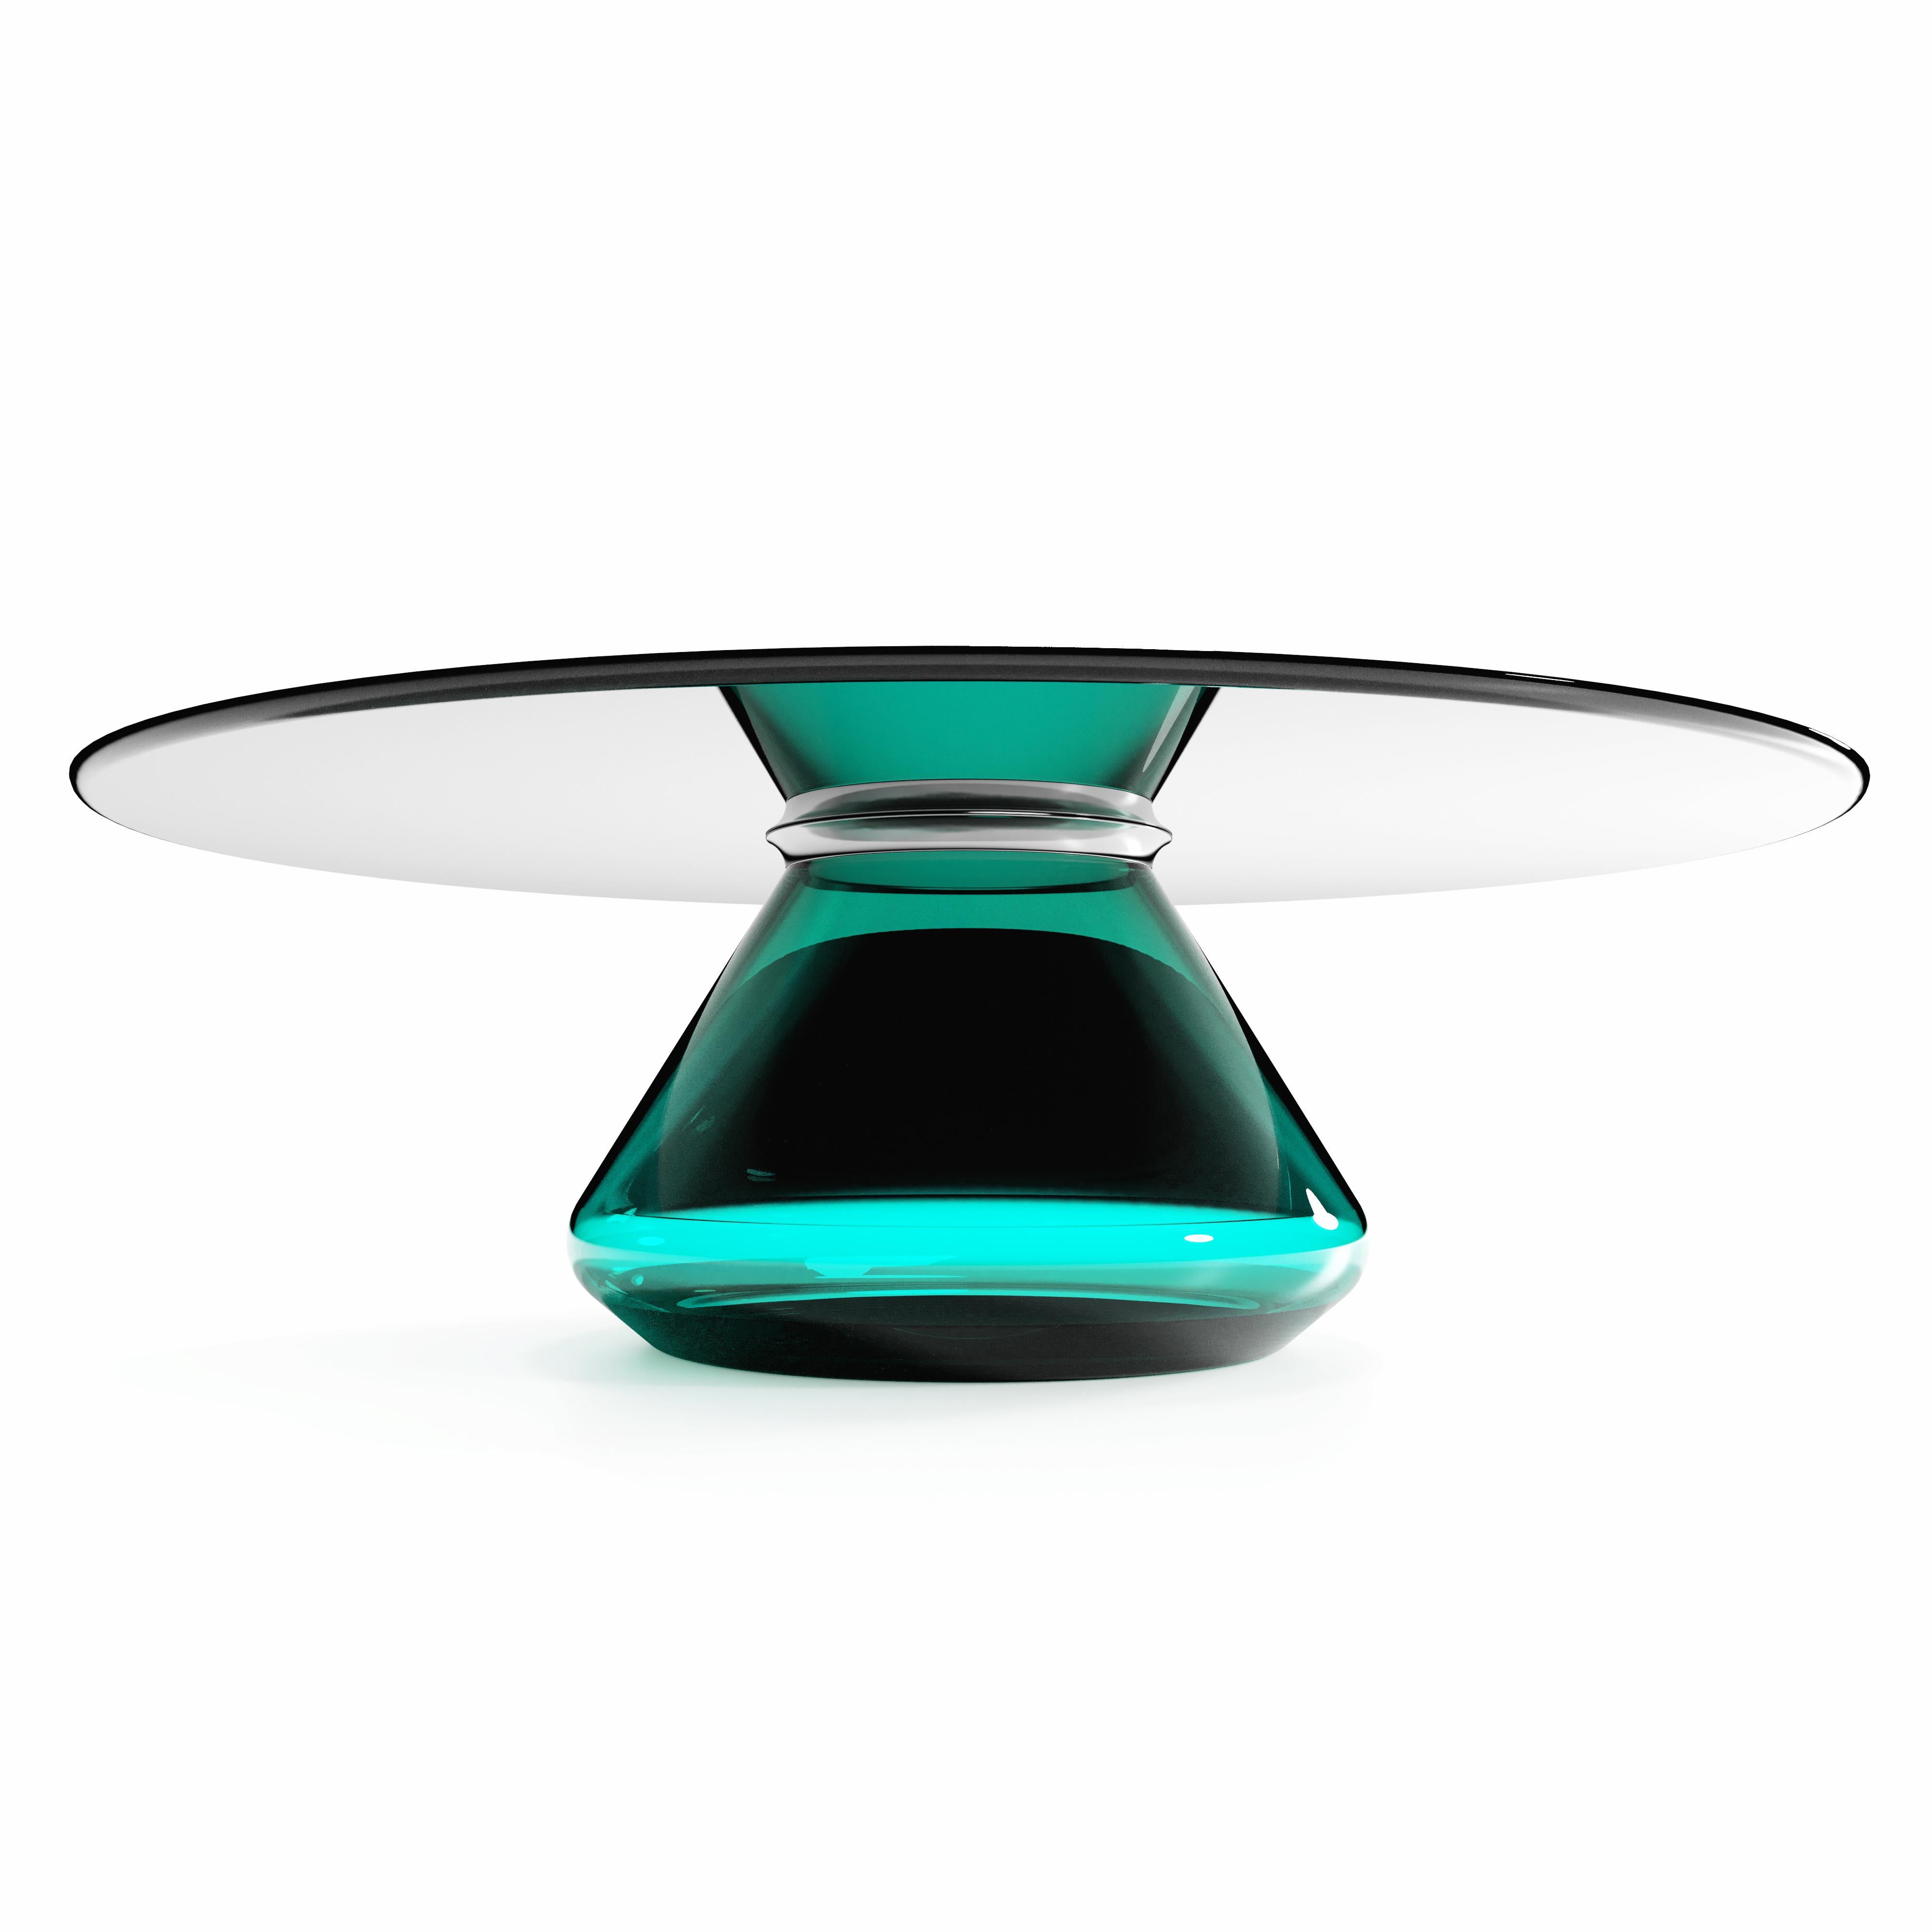 The Emerald Eclipse II coffee table by Grzegorz Majka.
Limited Edition of 8
Dimensions: 40 x 40 x 12.40 in
Materials: Glass

The total eclipse of every interior? With this amazing table everything is possible as with its Minimalist style it will